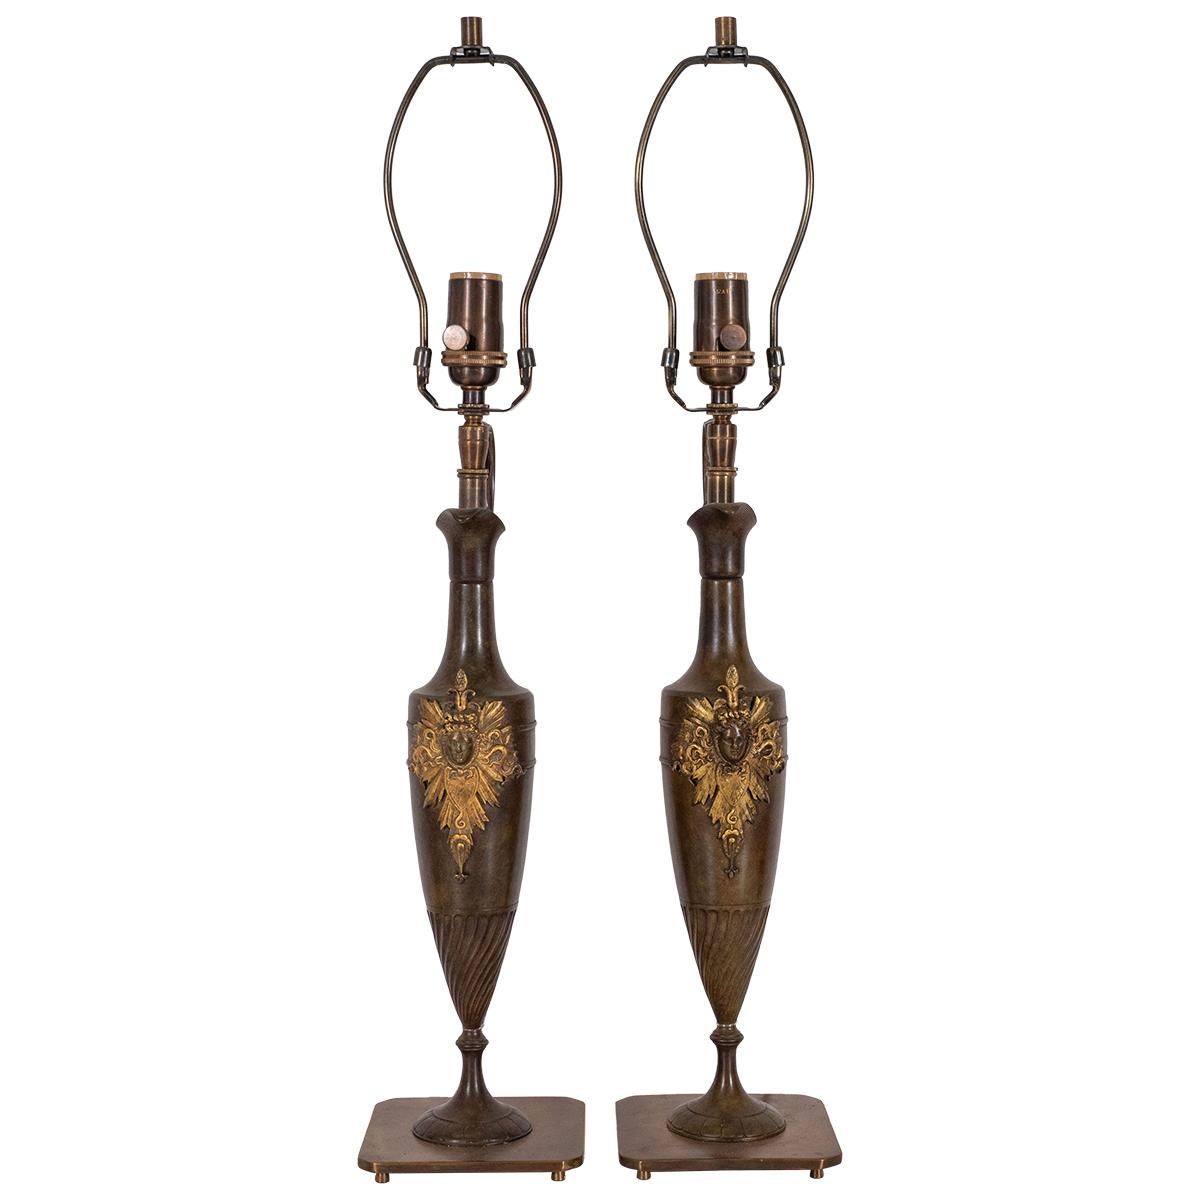 Pair of bronze amphora shaped tabled lamps with intricate gilt metal crests.